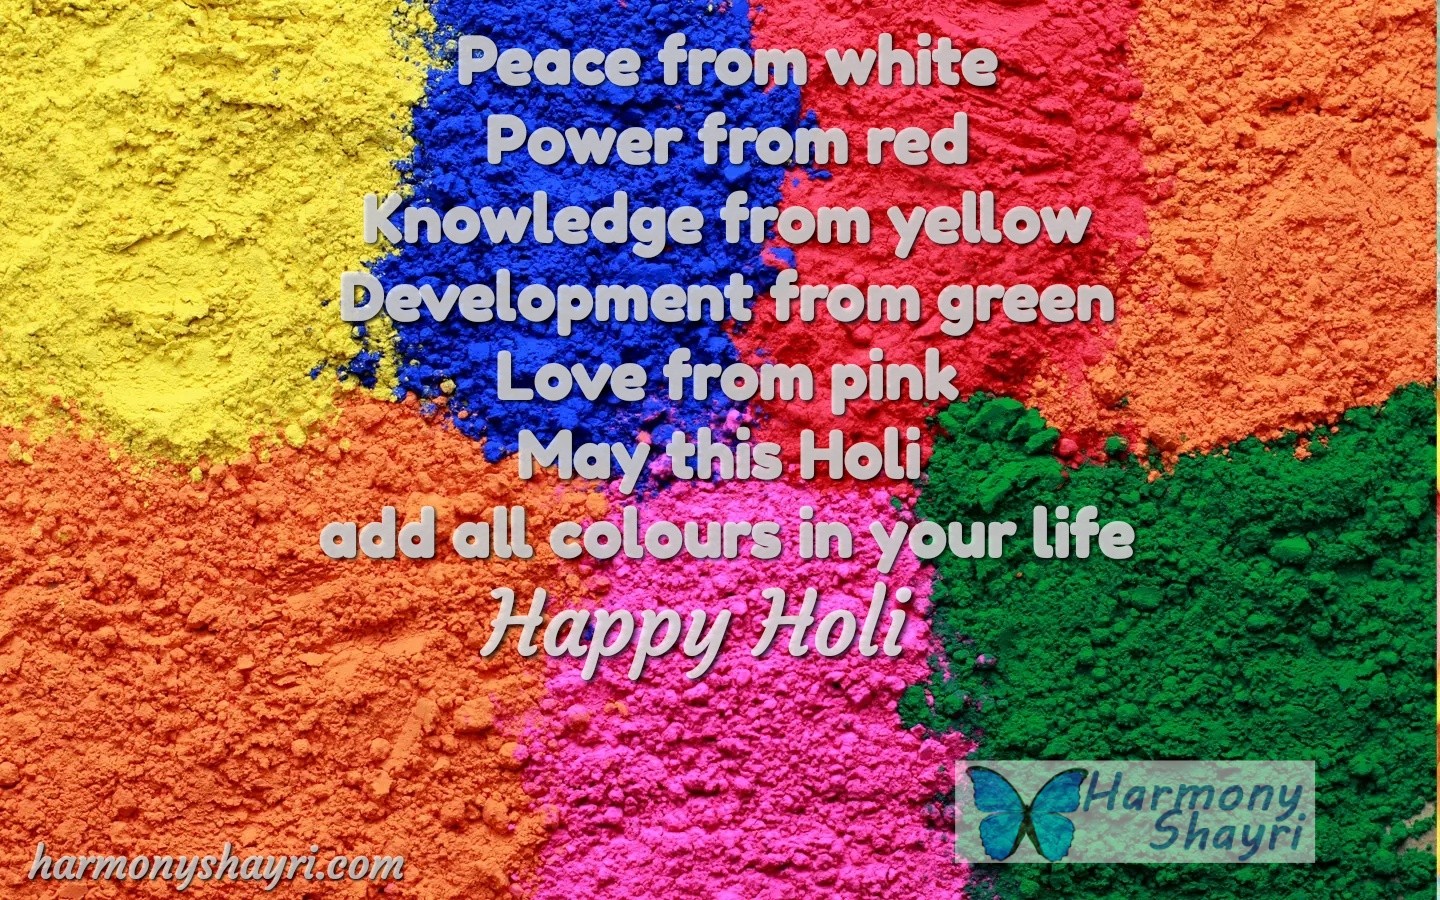 May this Holi add all colours in your life